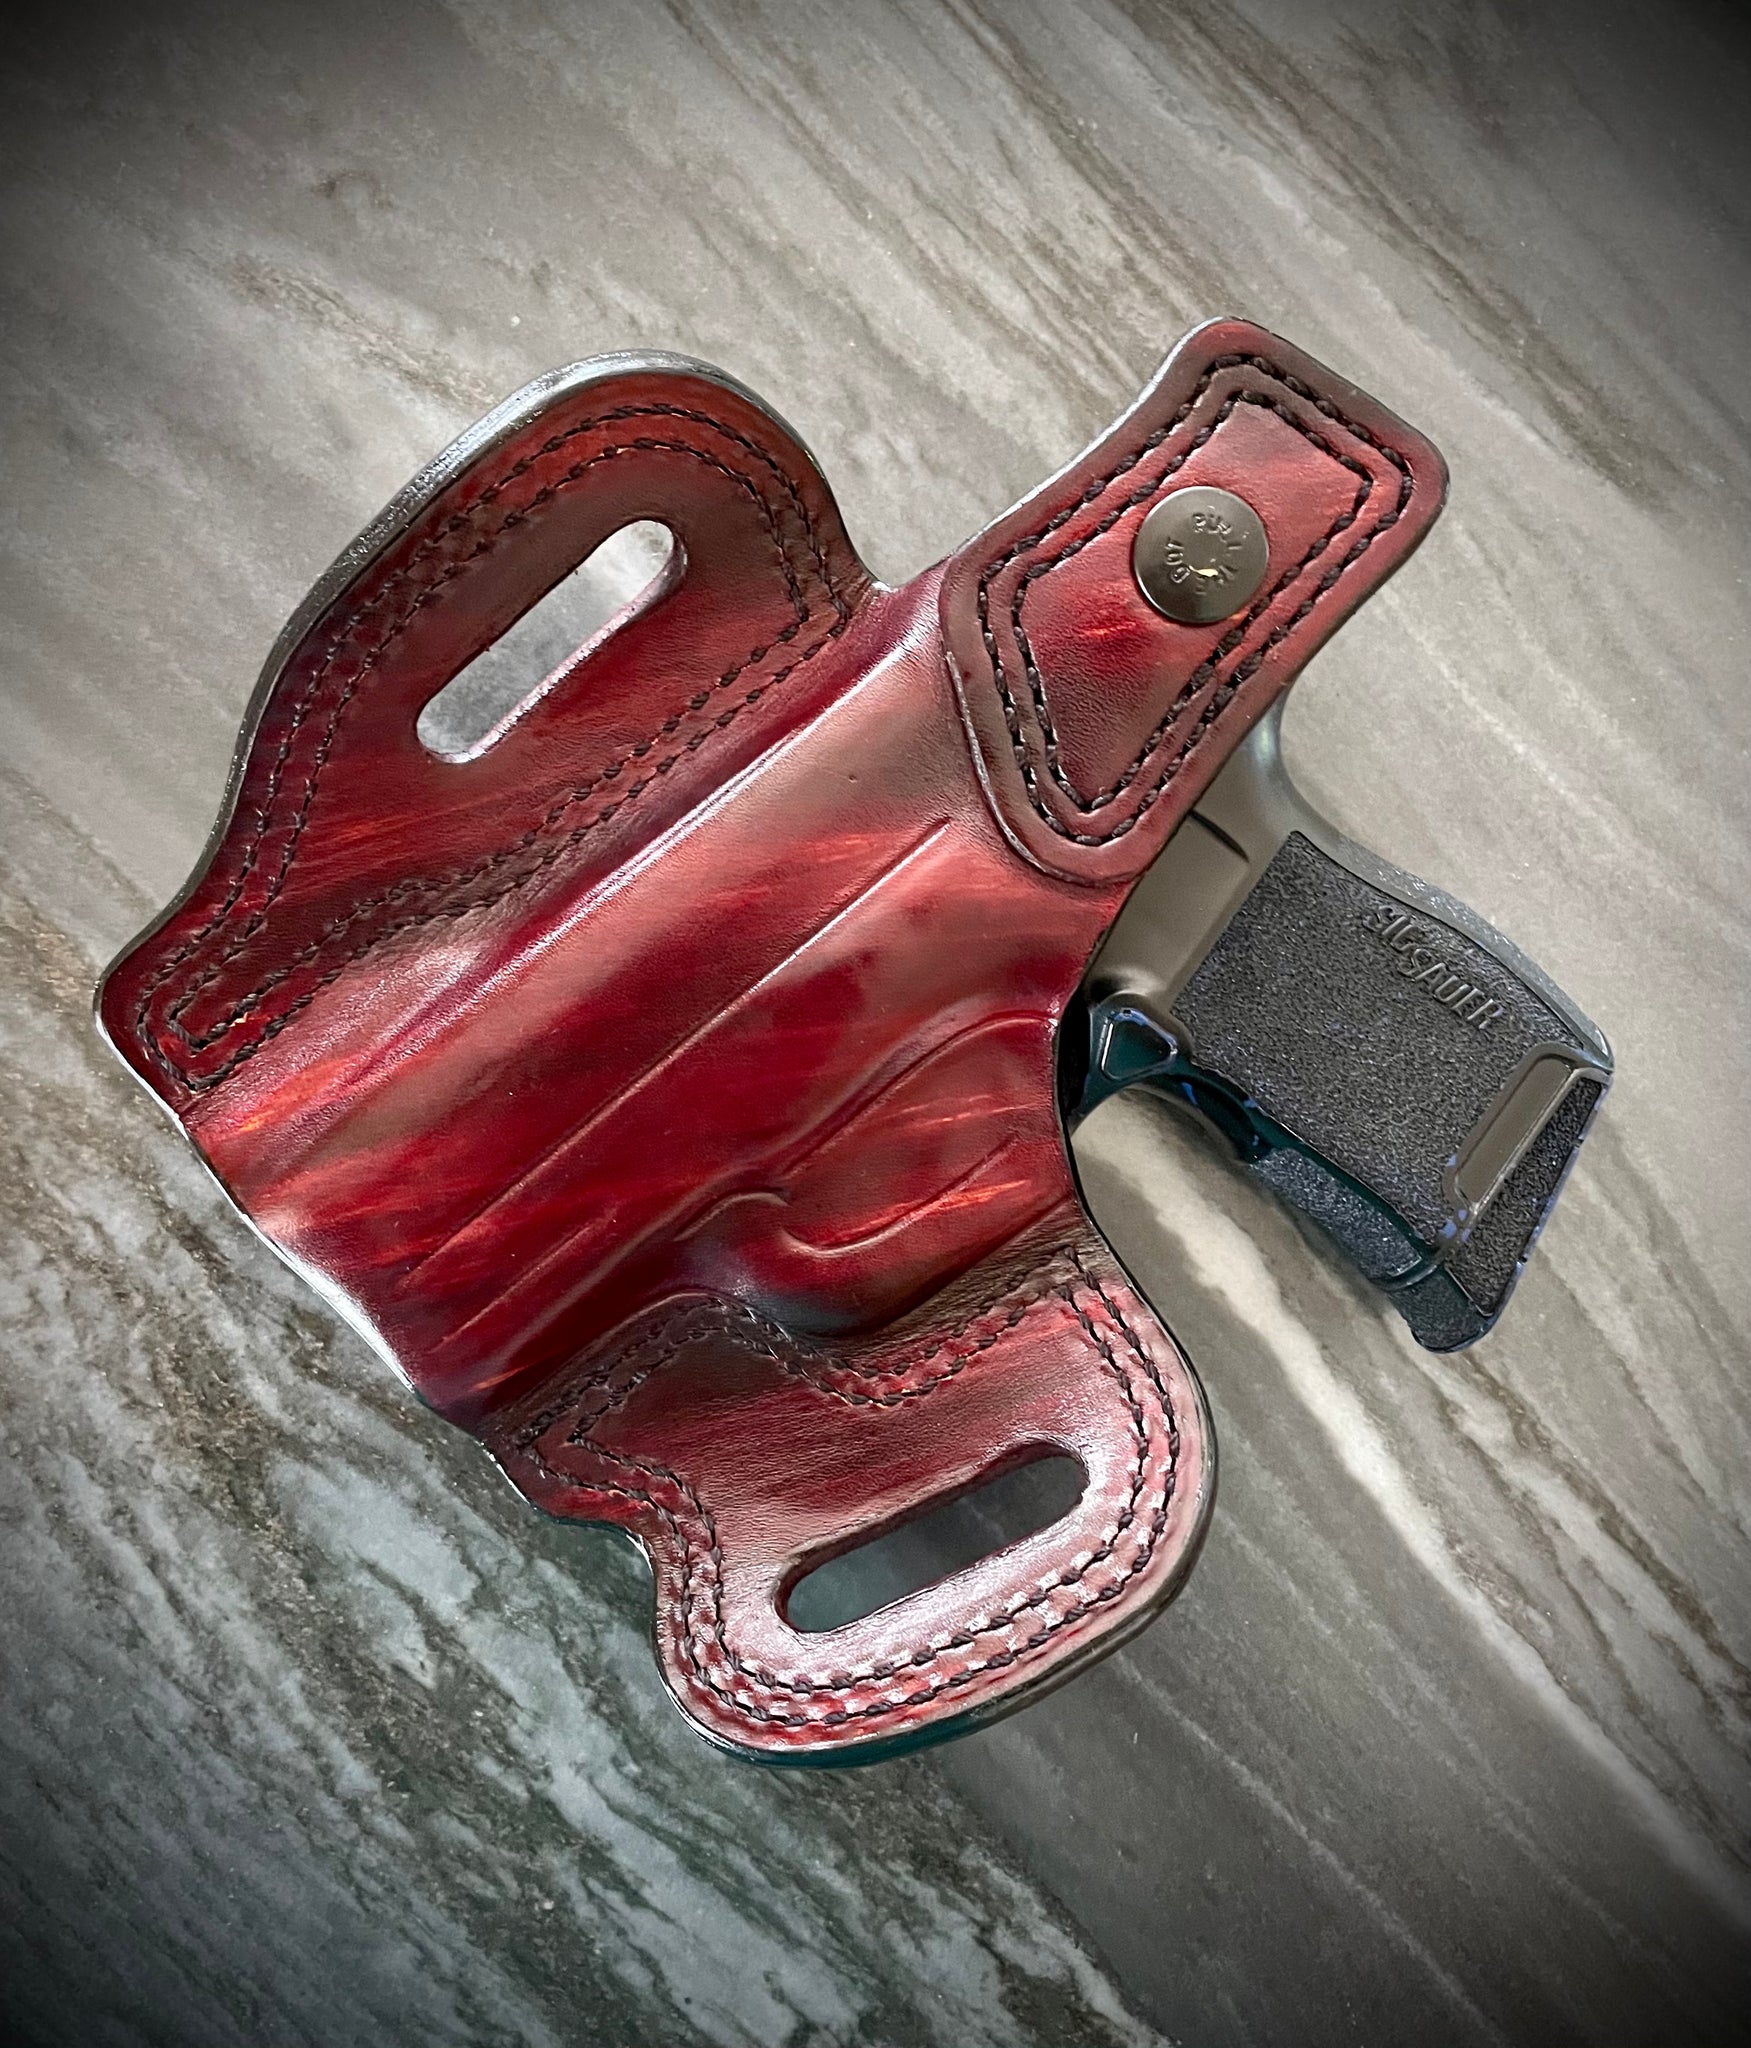 SIG P365 OWB Holster with Thumb break